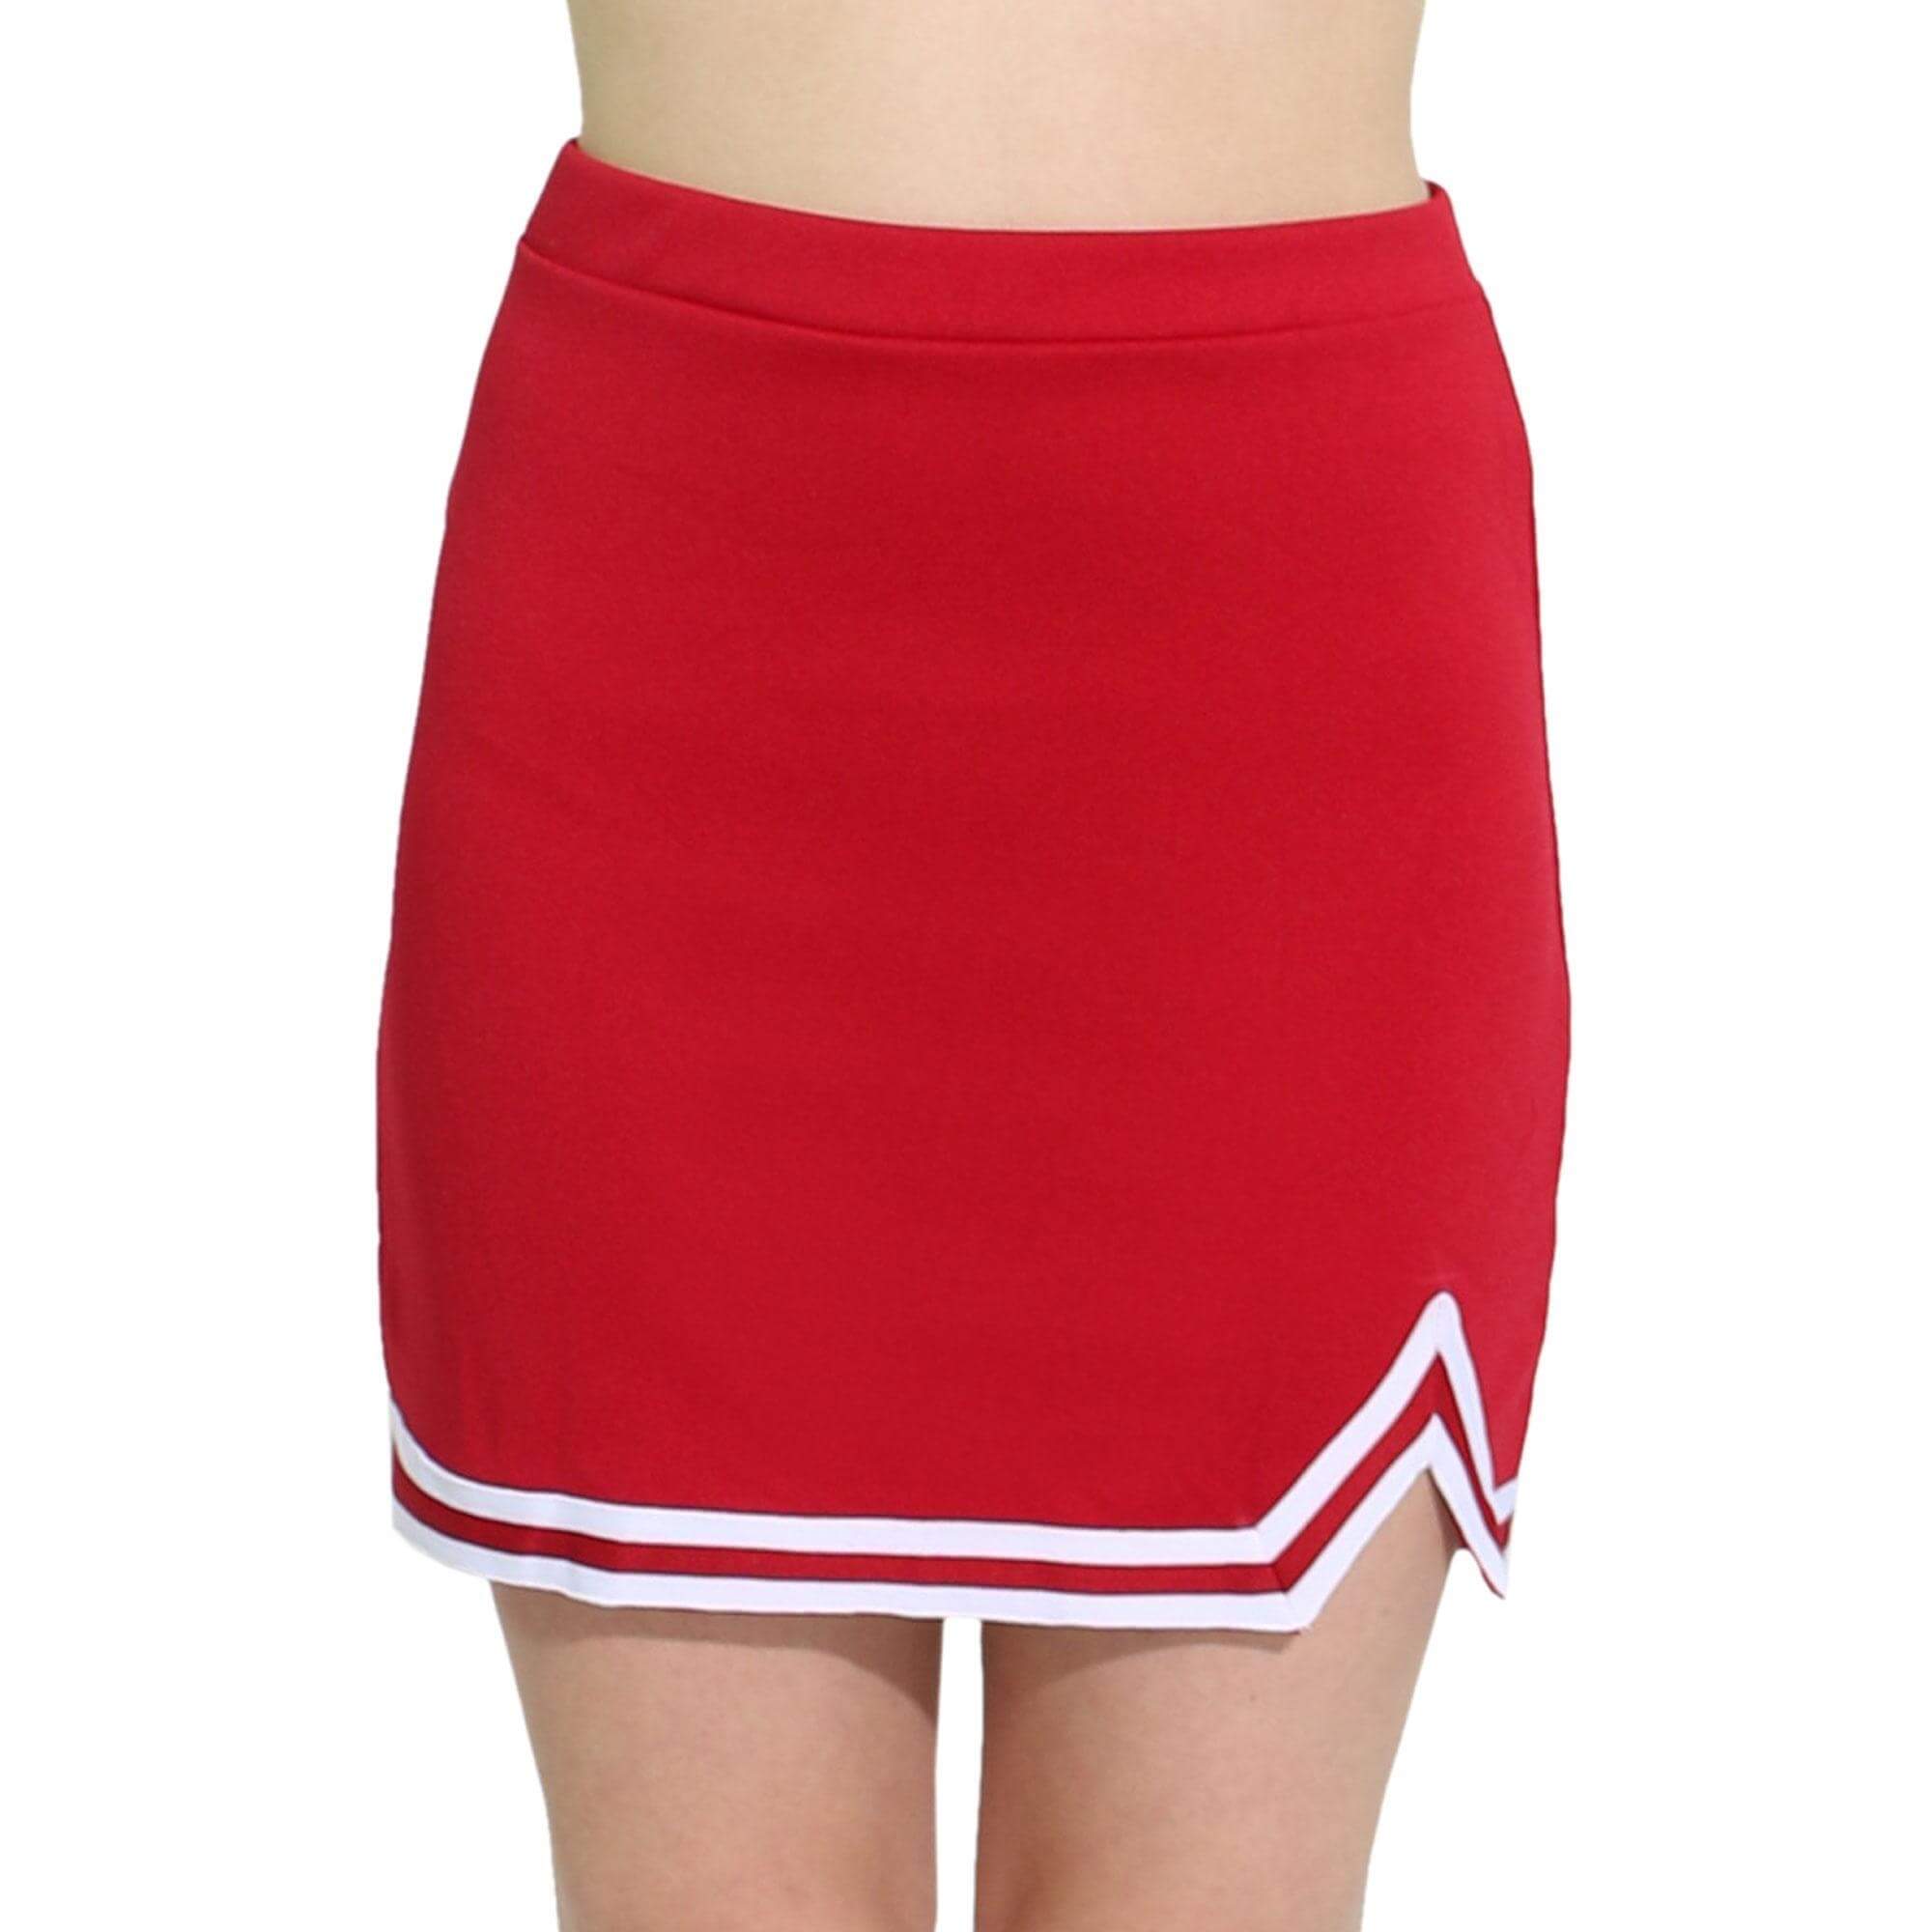 Danzcue Adult Double V A-Line Cheerleaders Uniform Skirt - Click Image to Close